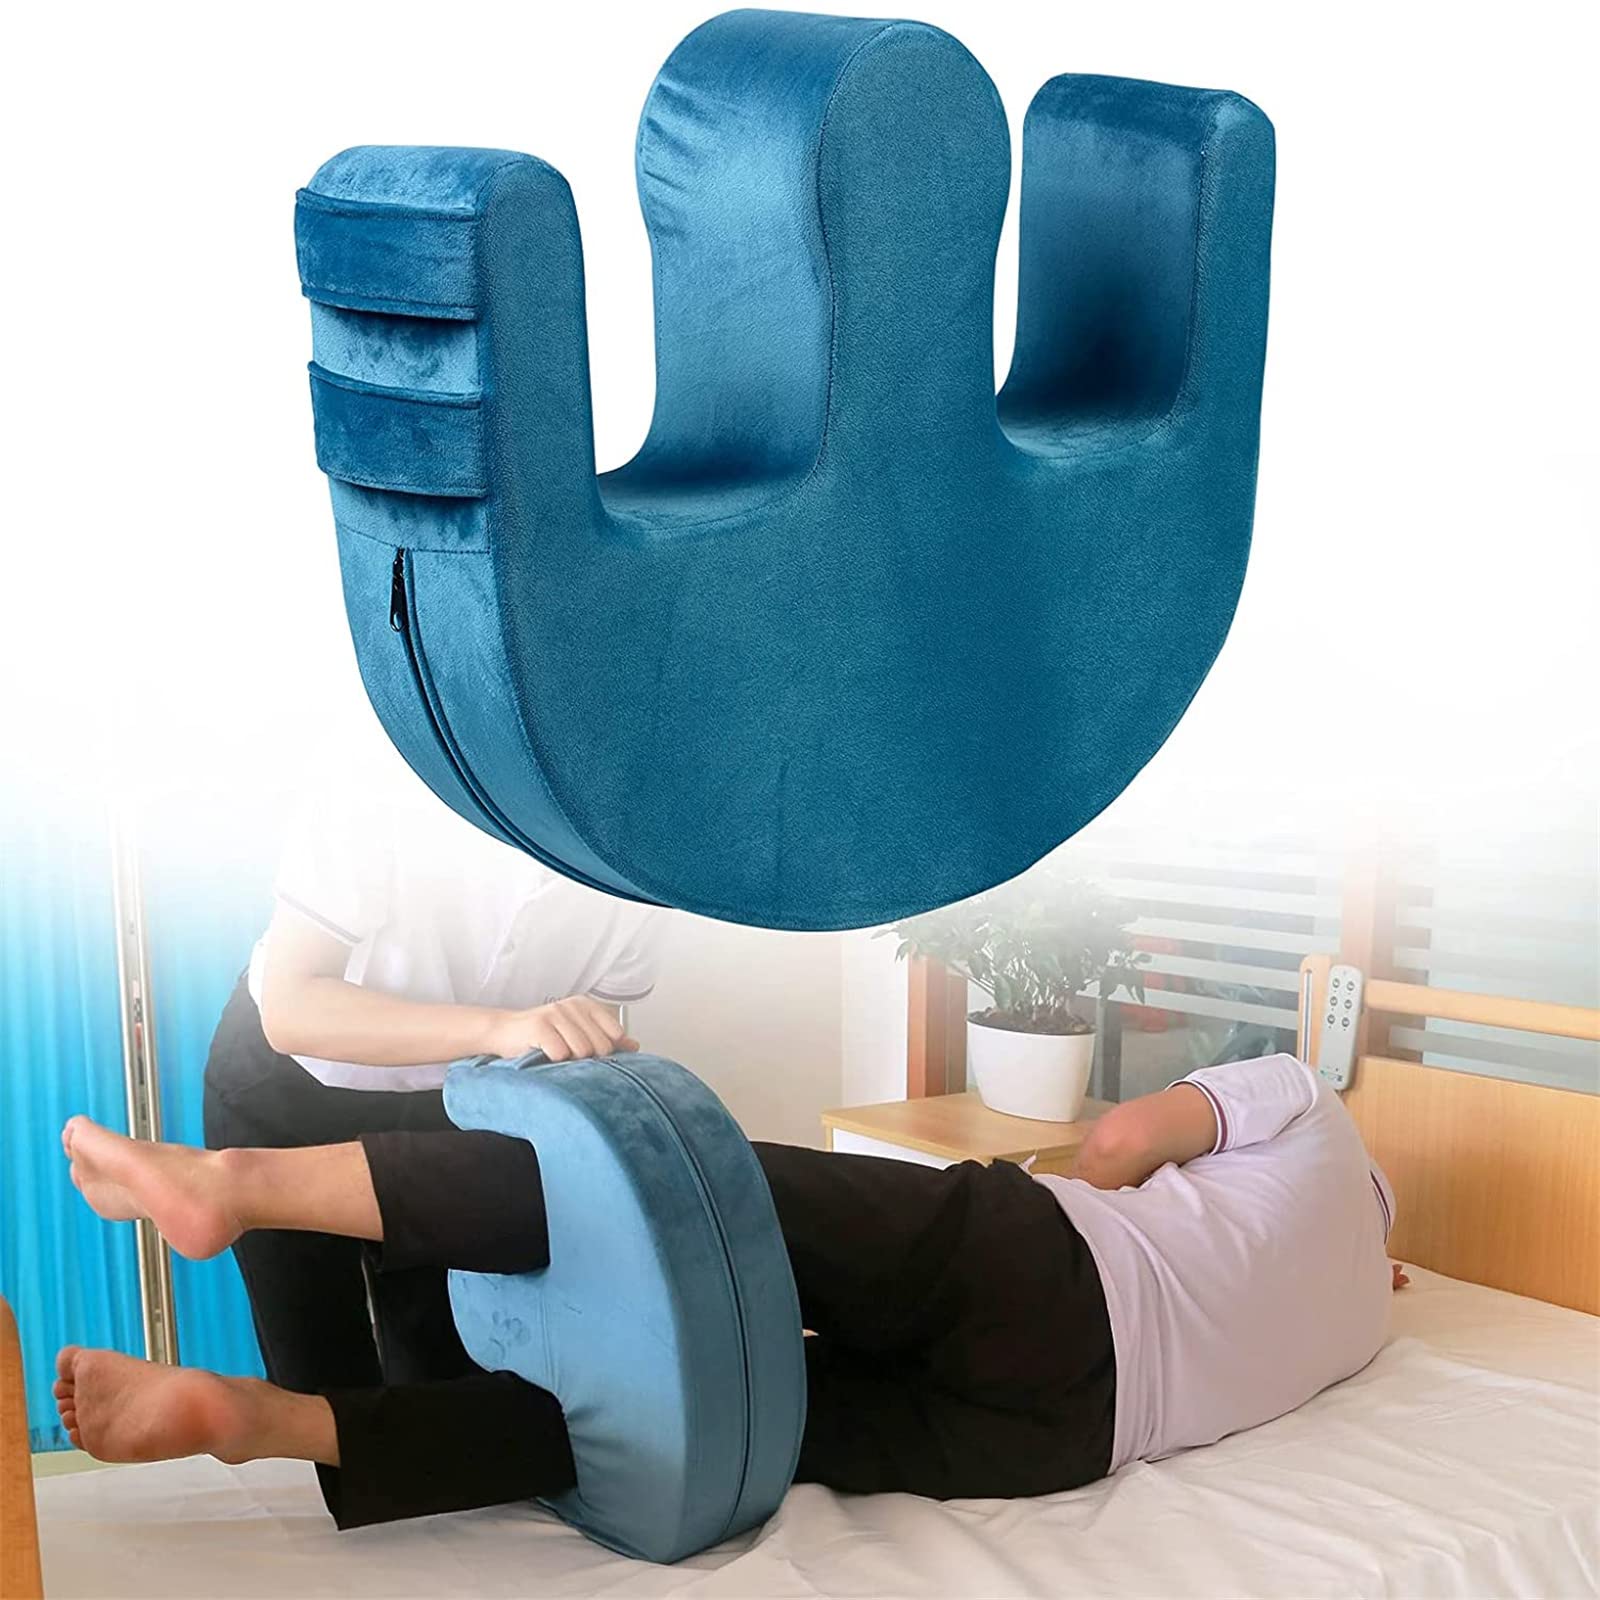 GLYIG Patient Turning Device Multifunctional Turning Device, Hemiplegia Lifting and Transfer Care for The Disabled Elderly Safe Bed Care Products to Help The Elderly Turn Over